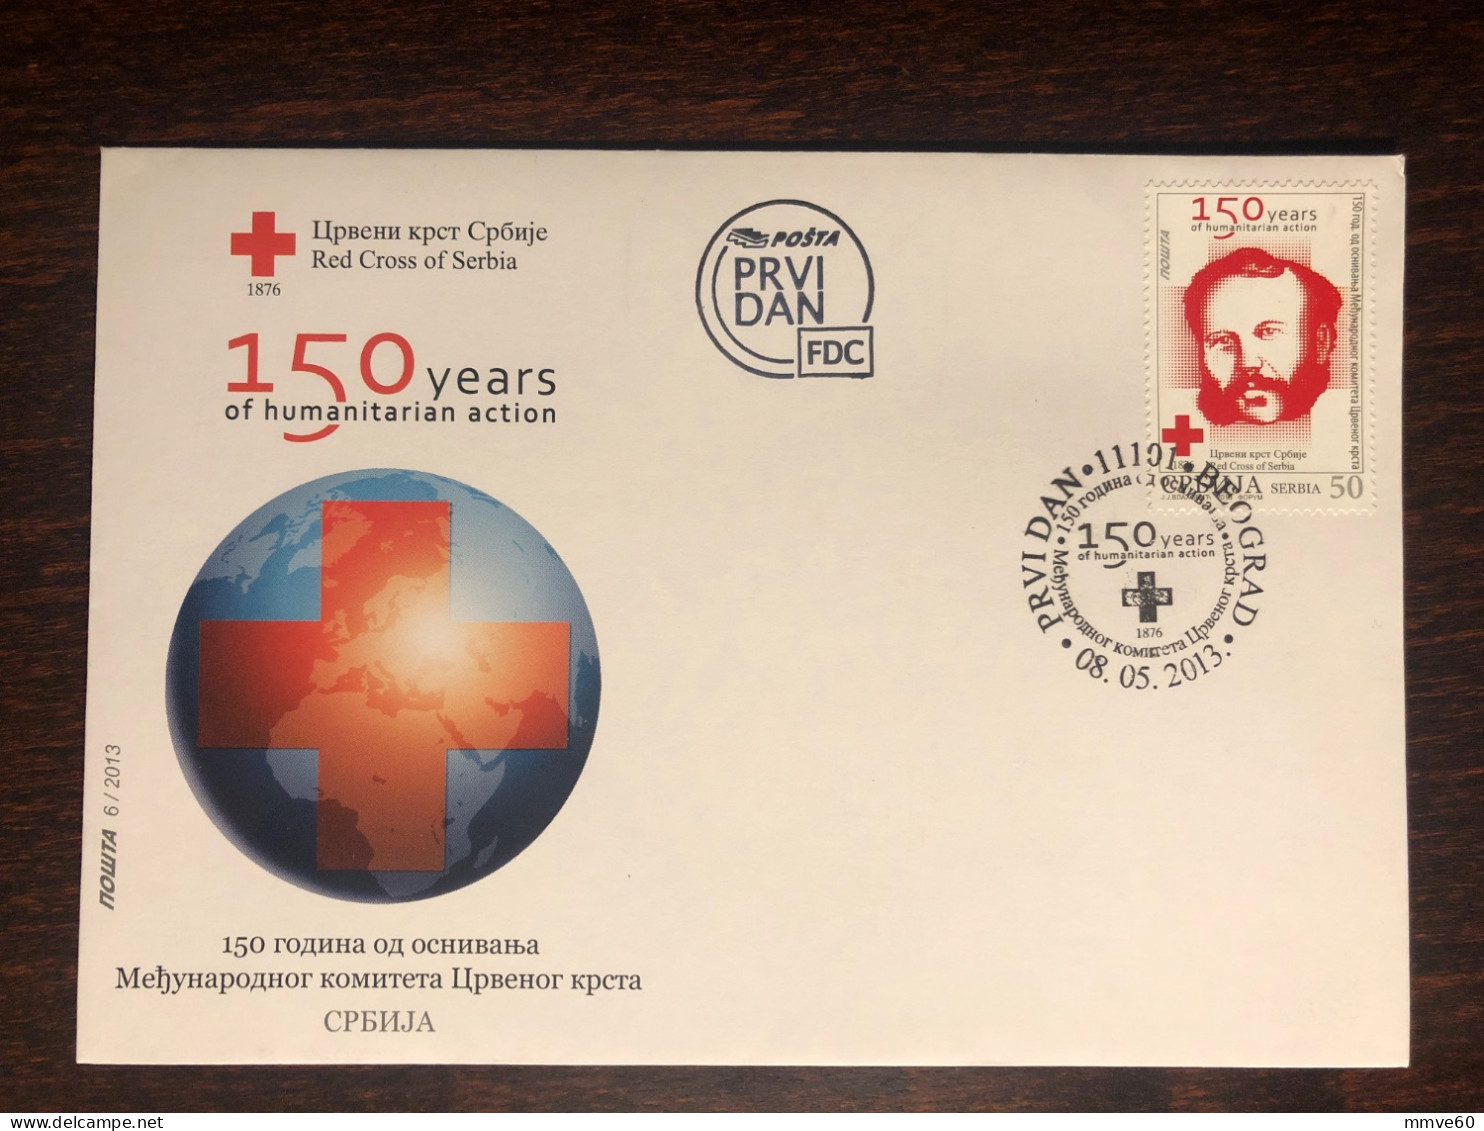 SERBIA FDC COVER 2013 YEAR RED CROSS DUNANT HEALTH MEDICINE STAMPS - Serbie